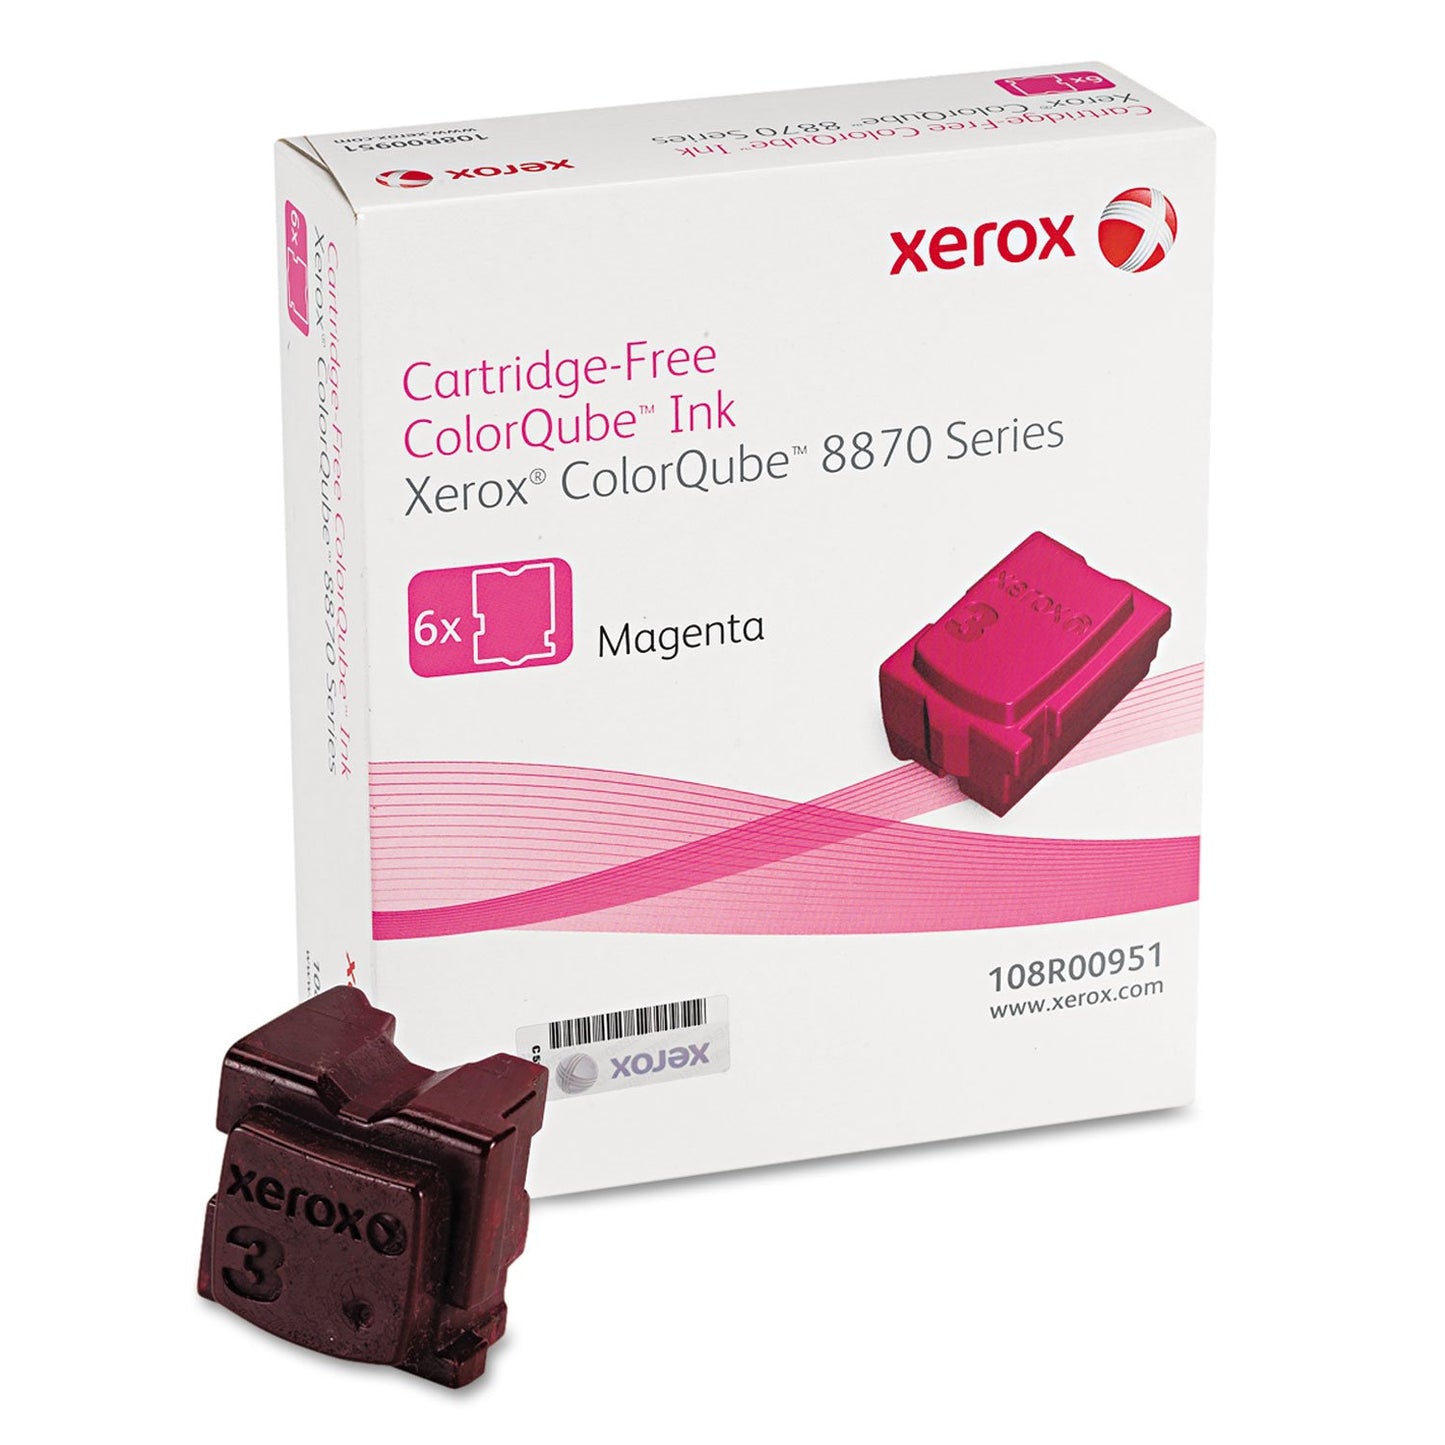 Xerox 108R00951 Solid Ink Stick, Magenta, 6/Box - in Retail Packaging